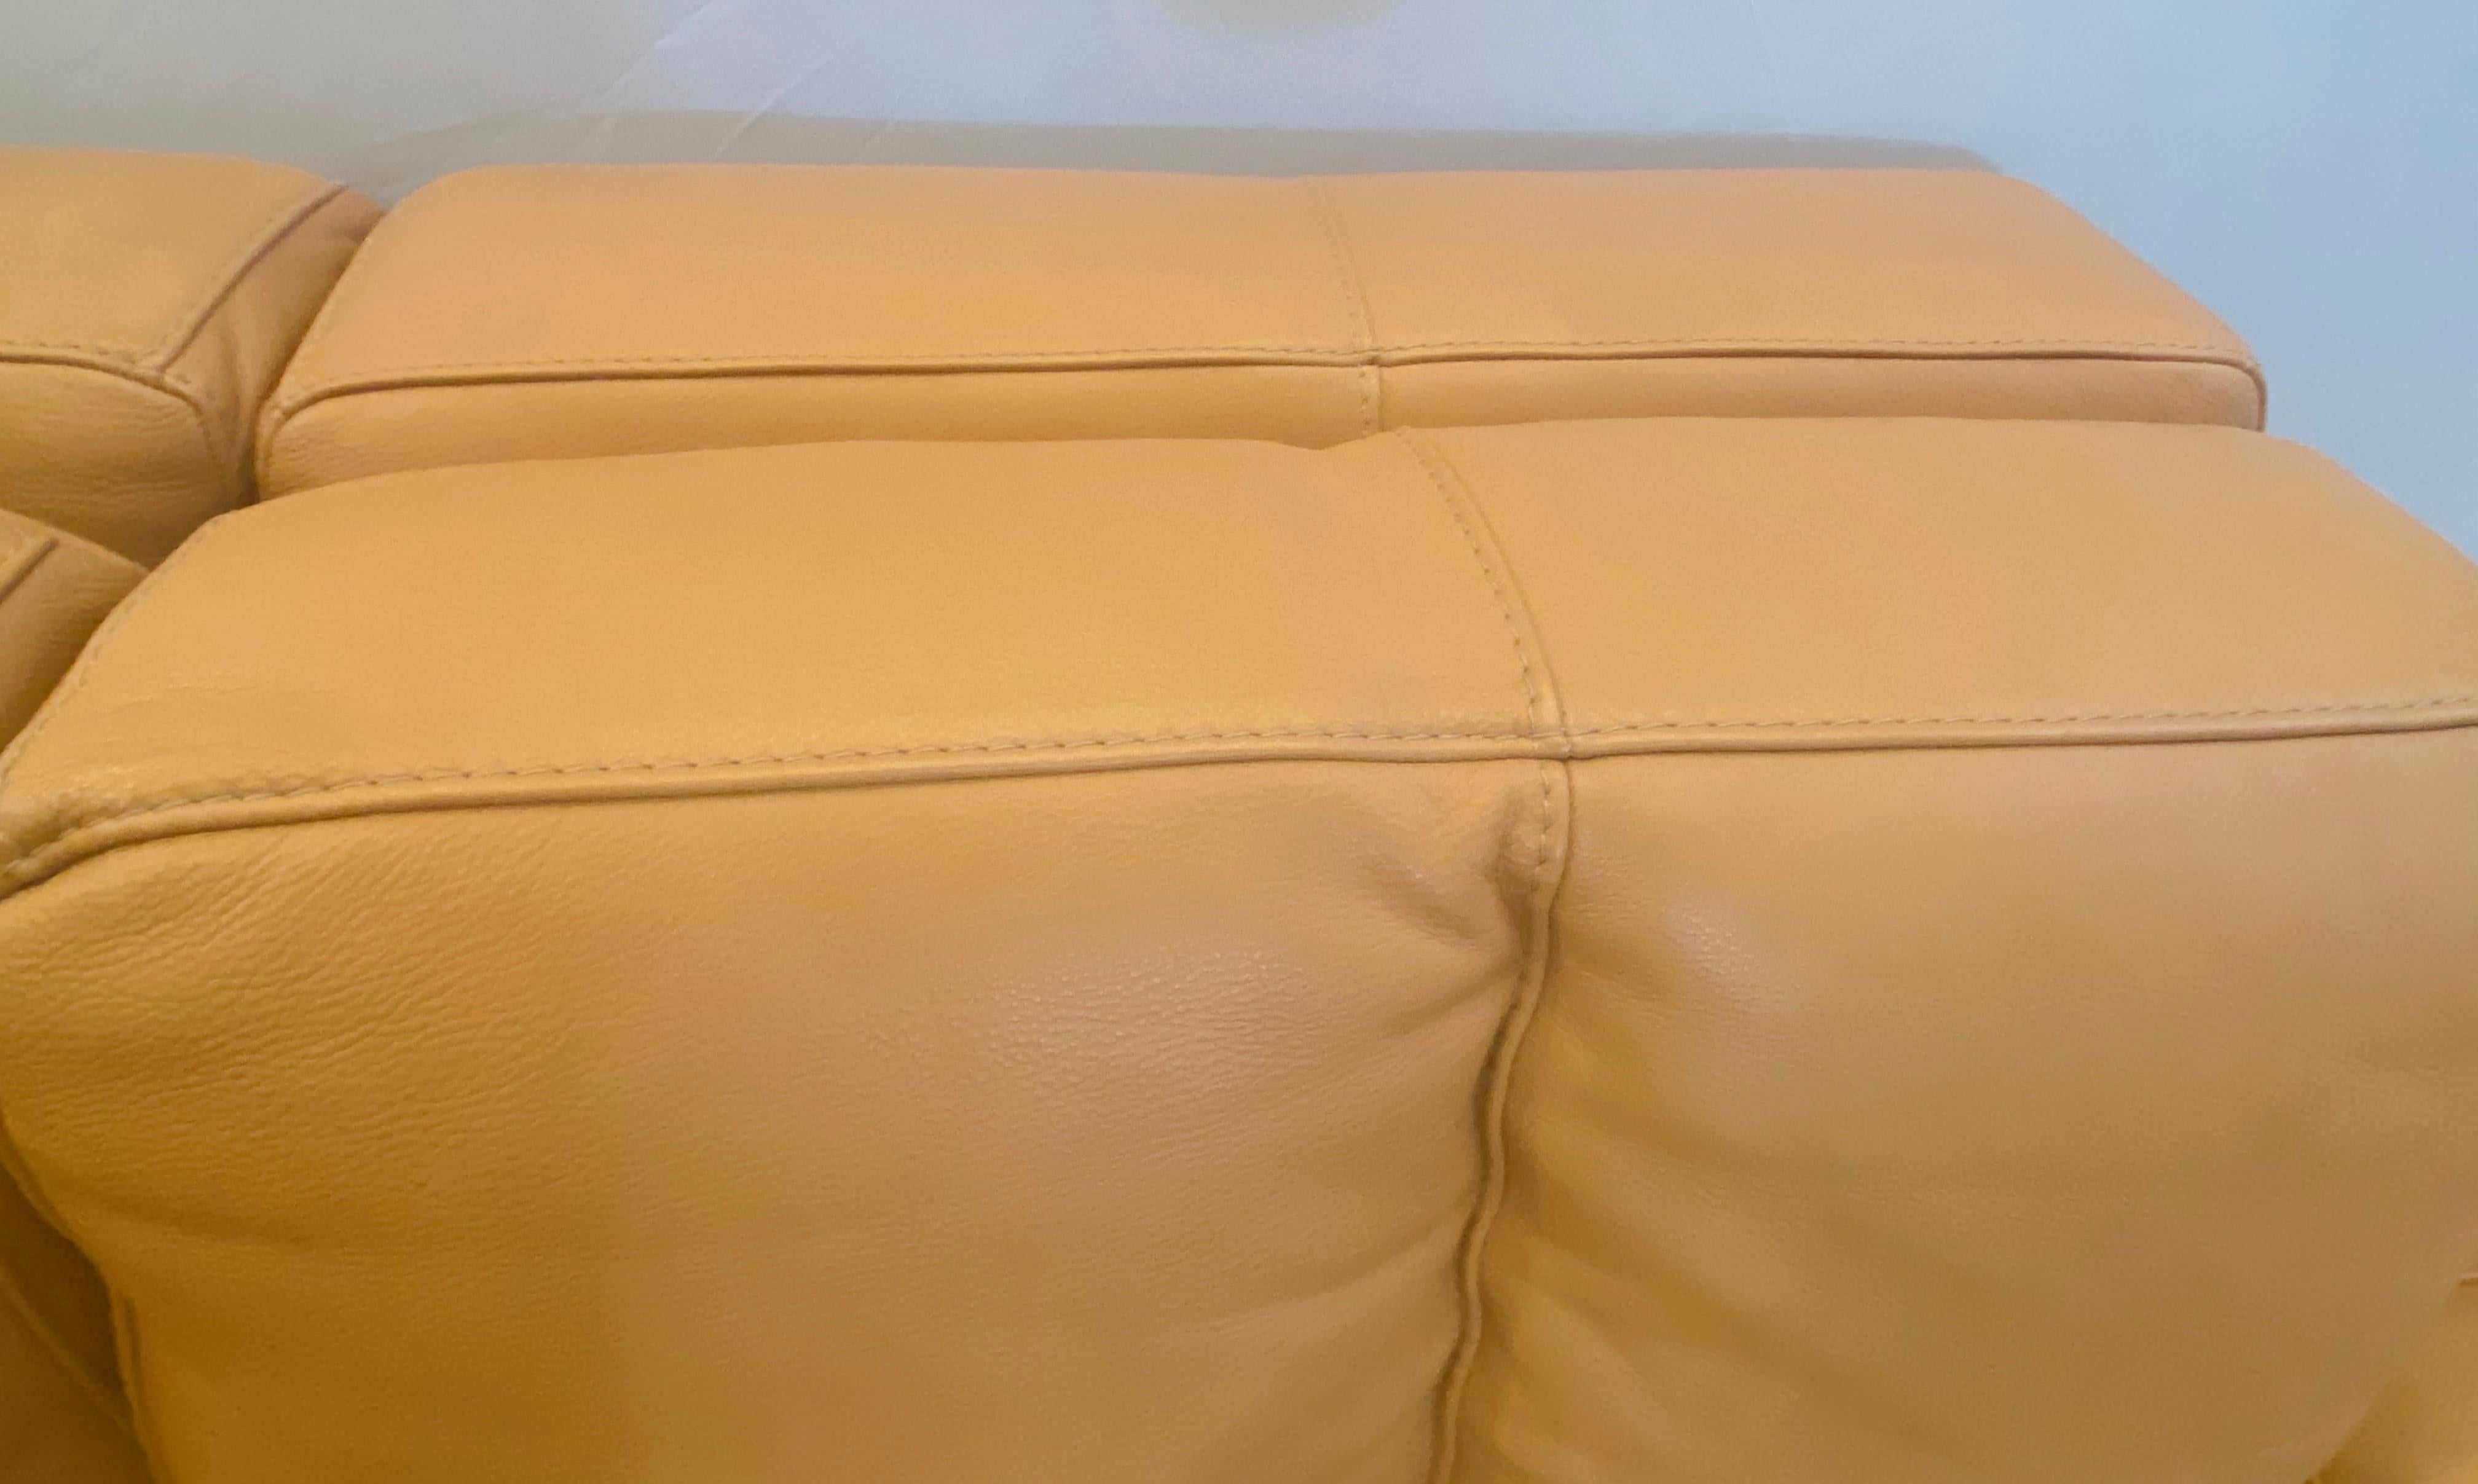 Late 20th Century Modern Tan Leather Sectional Sofa by Roche Bobois